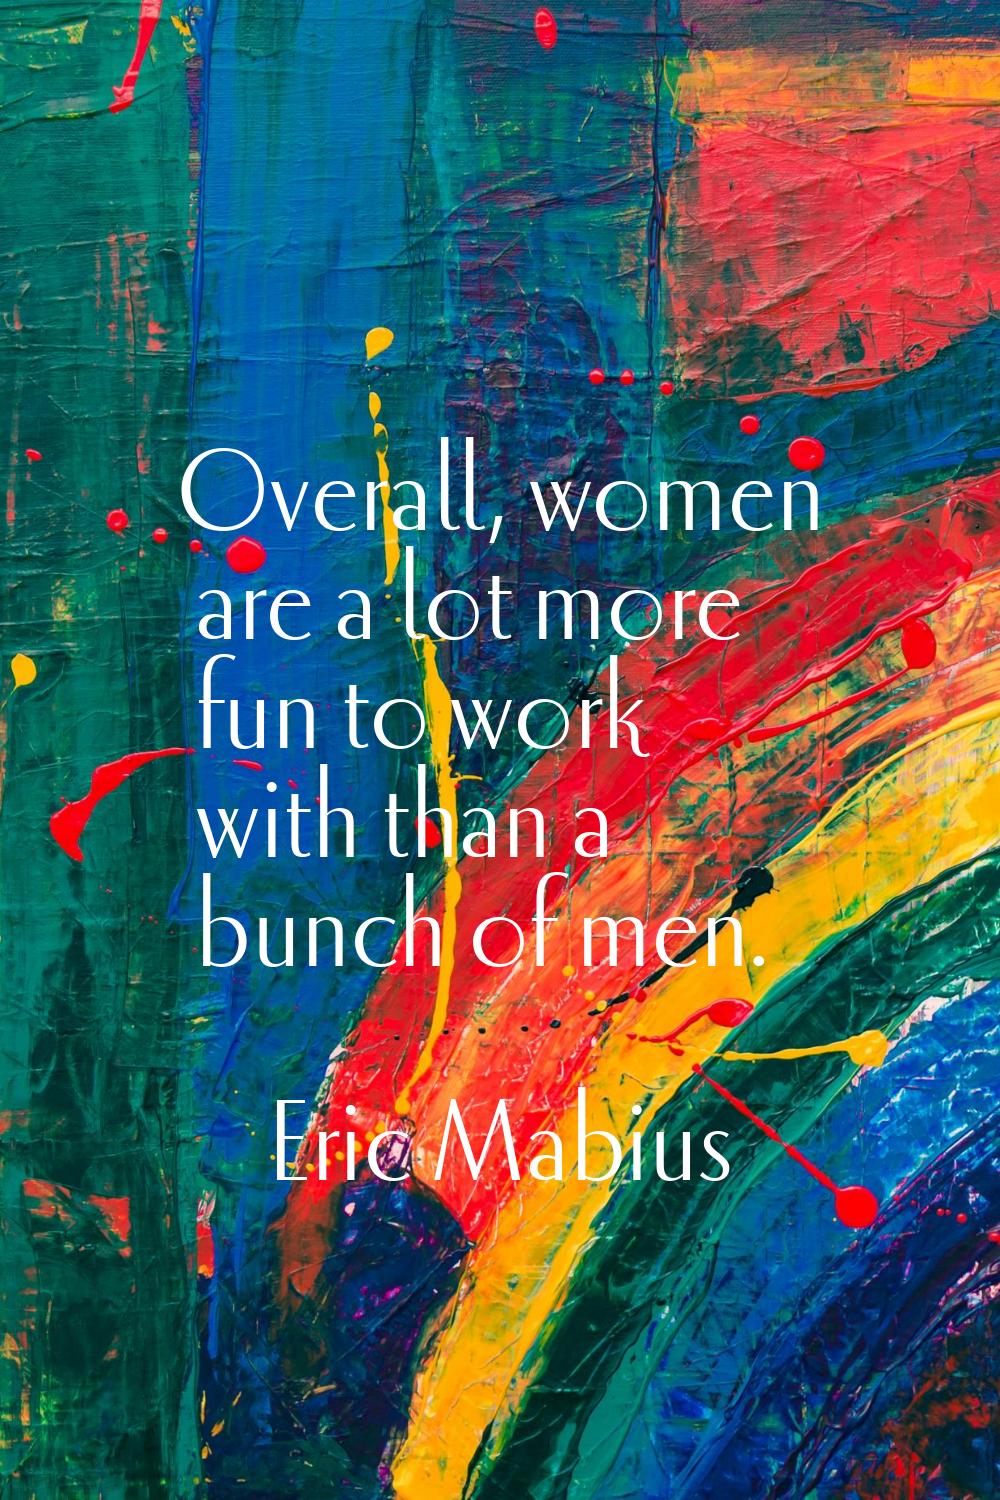 Overall, women are a lot more fun to work with than a bunch of men.